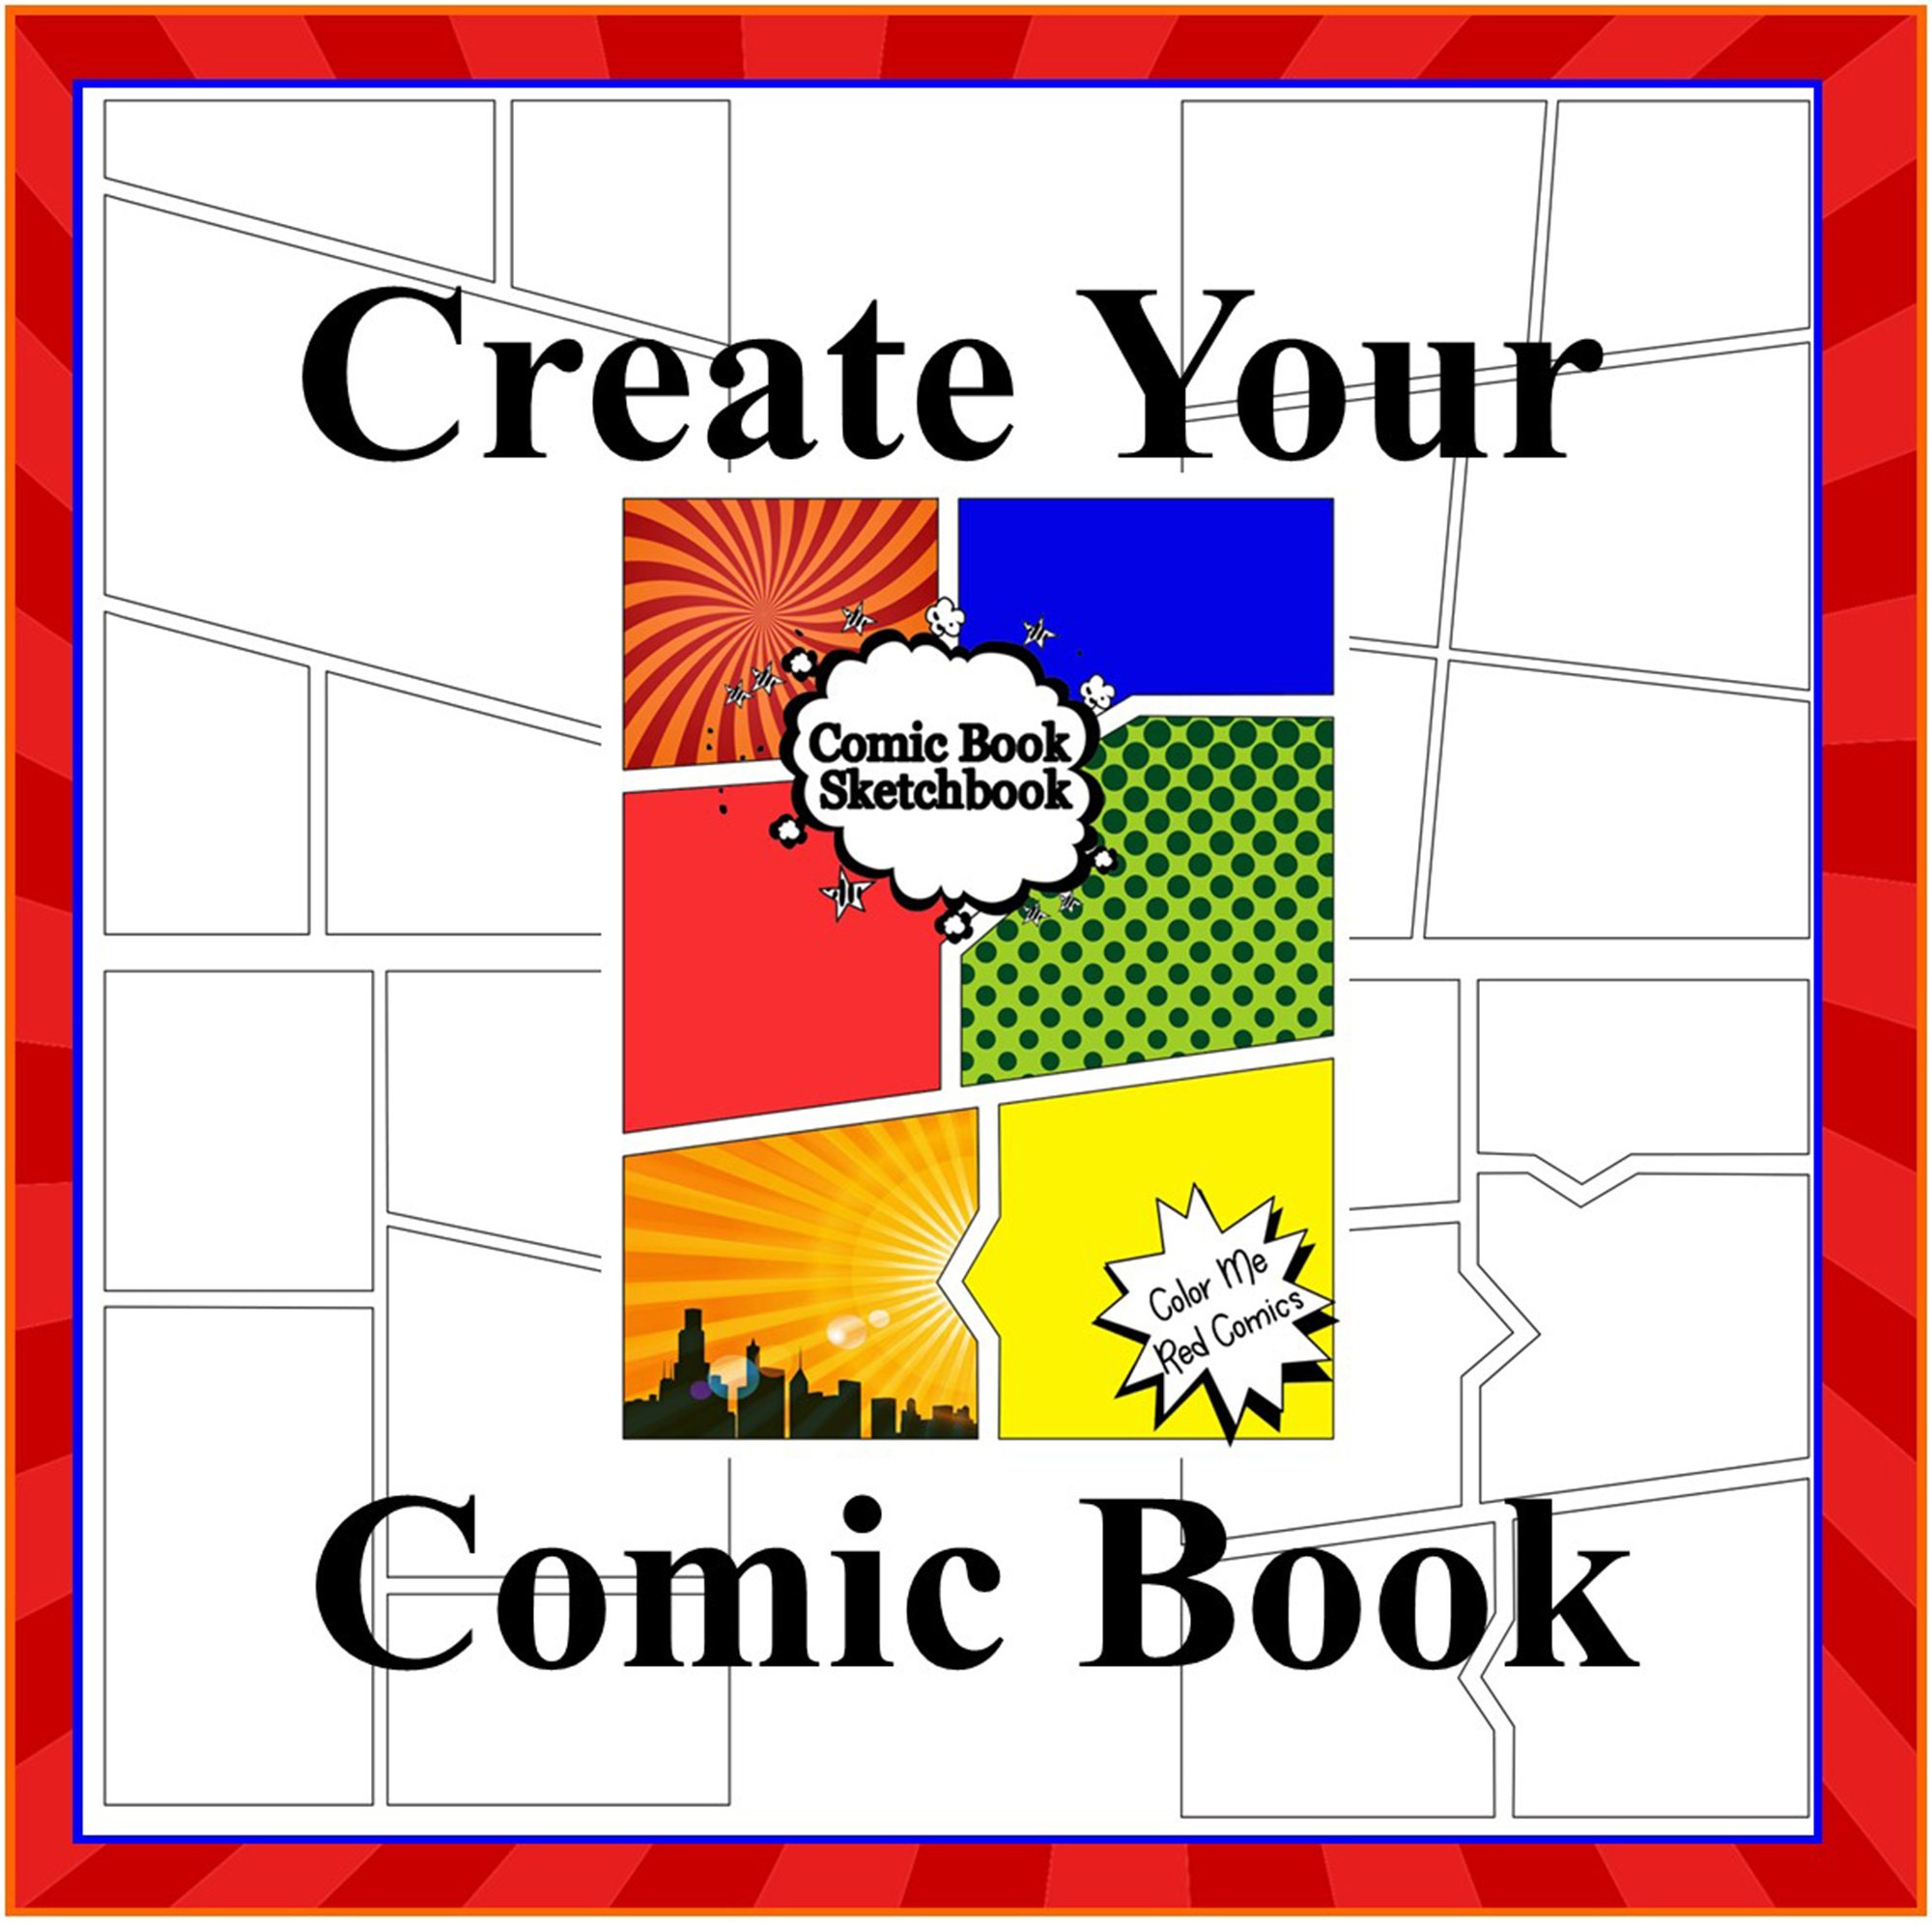 Make Your Own Comic Book: Art and Drawing Comic Strips, Great Gift for Creative Kids - Red [Book]